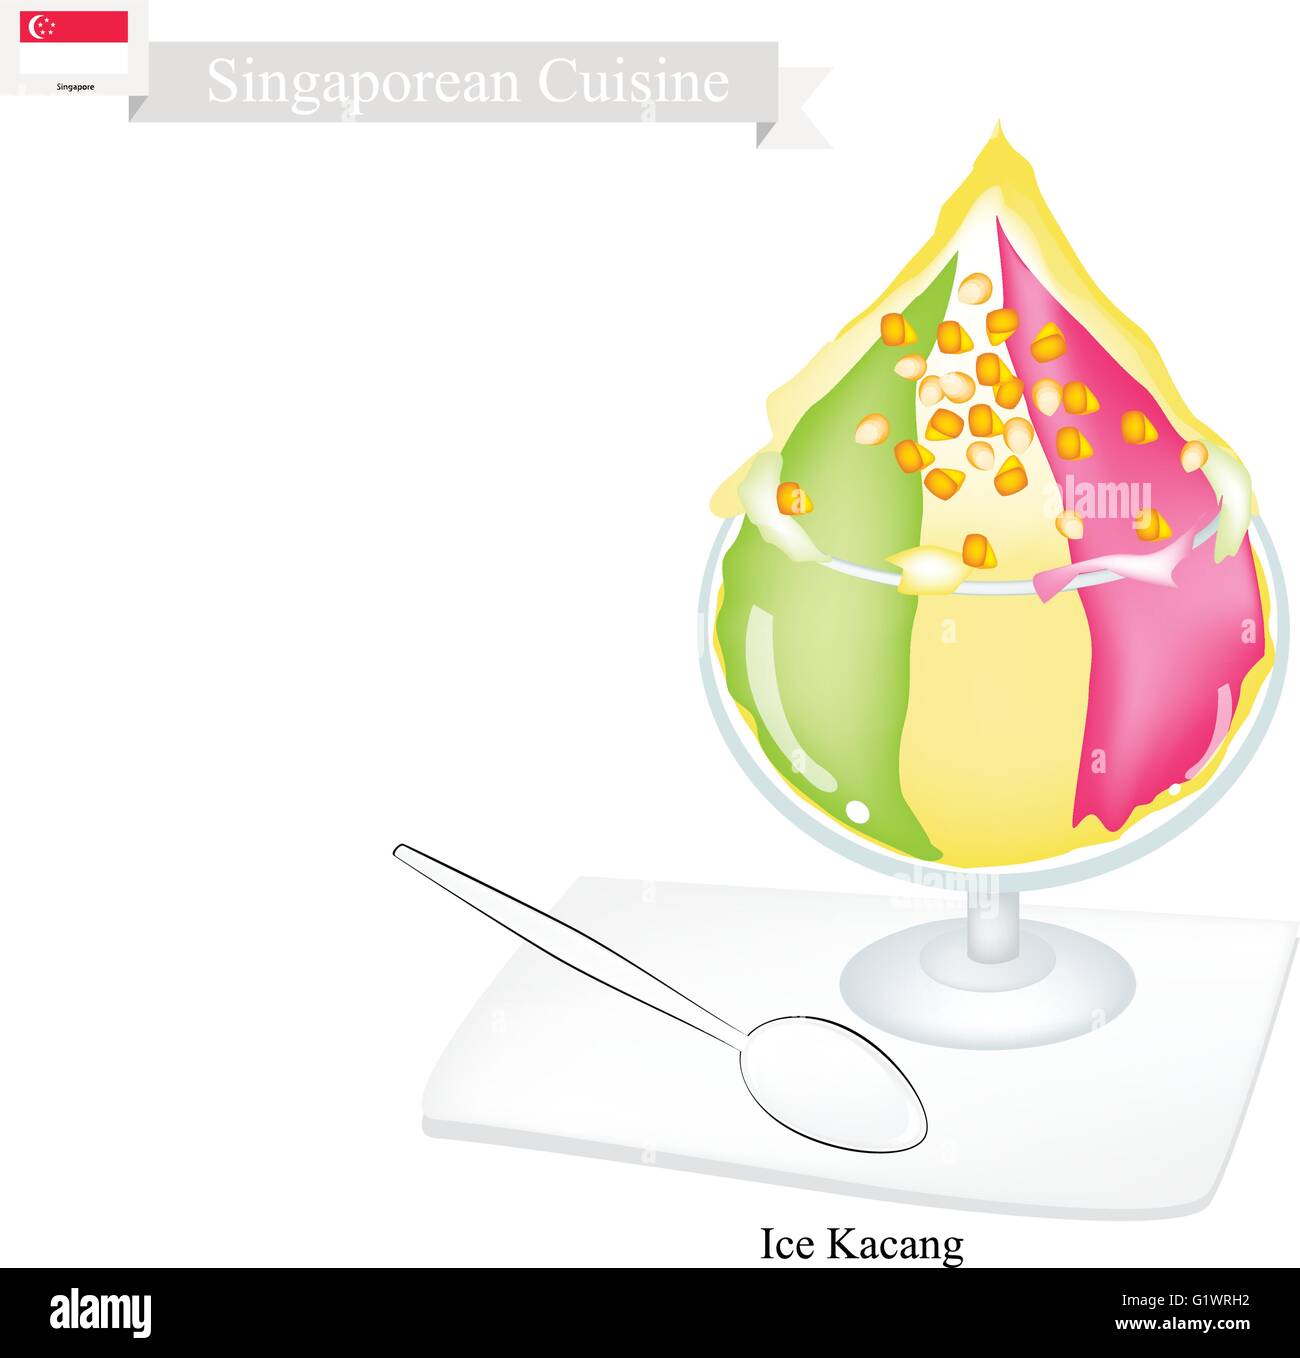 Singaporean Cuisine, Ice Kacang or Traditional Shaved Ice, Beans and Colorful Jelly. One of The Most Popular Dessert in Singapor Stock Vector